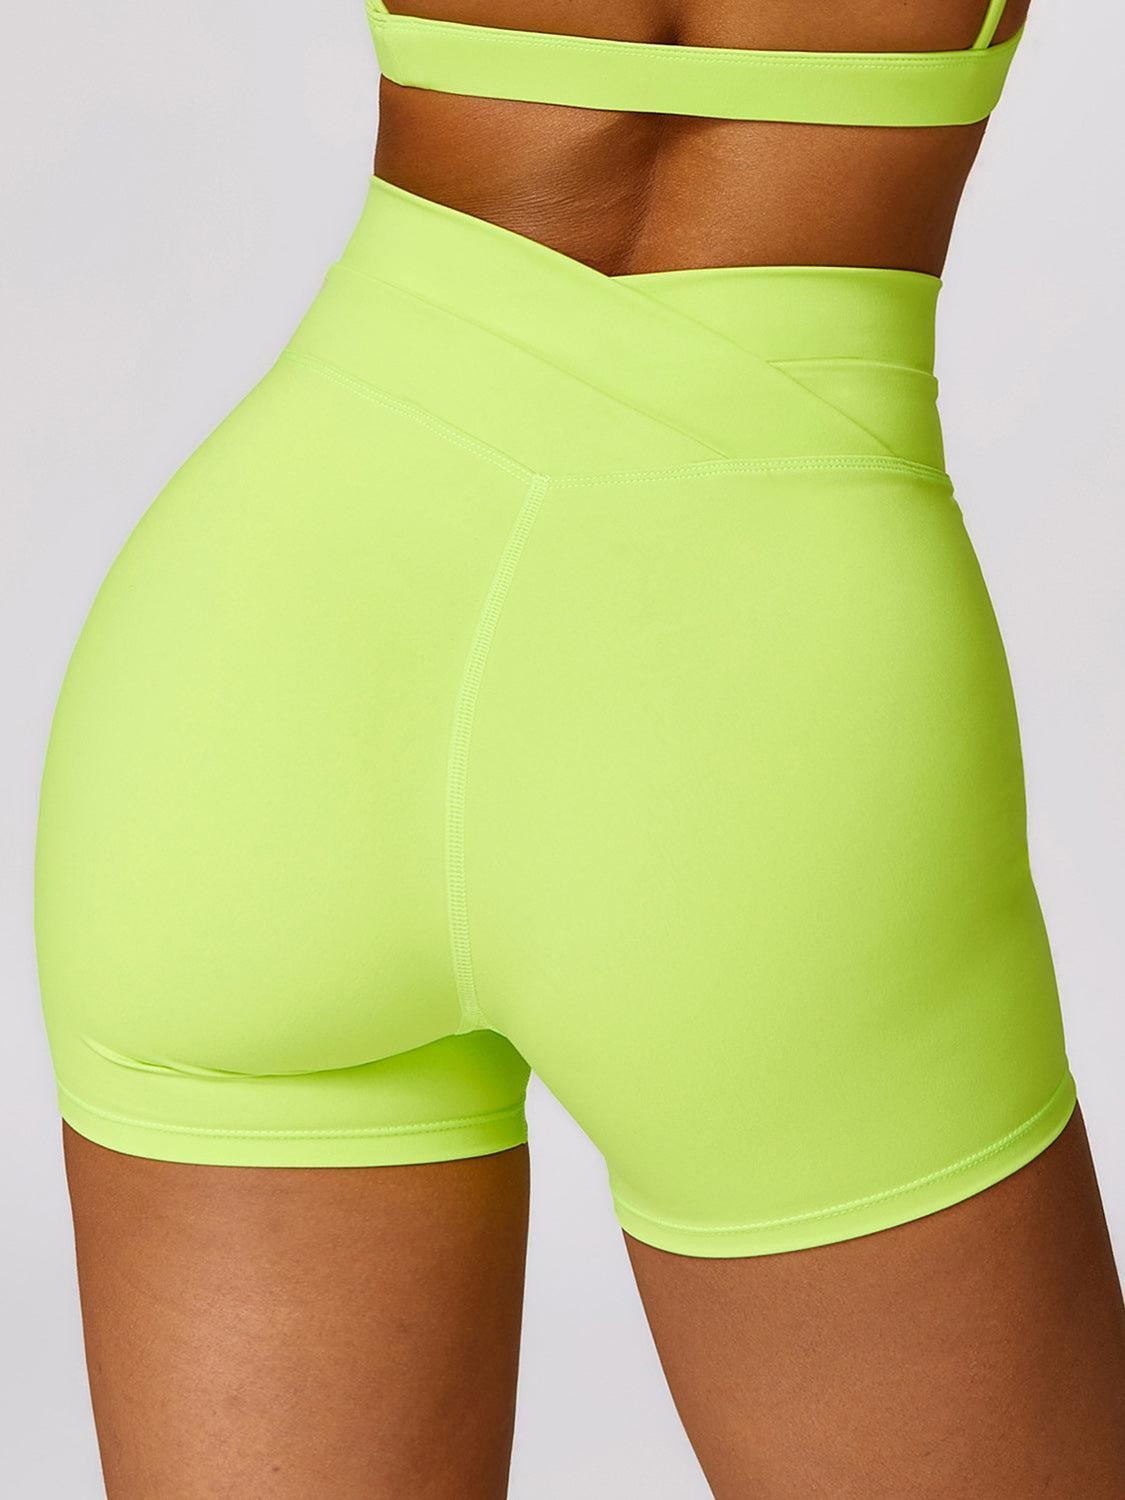 a woman in neon green shorts and a bra